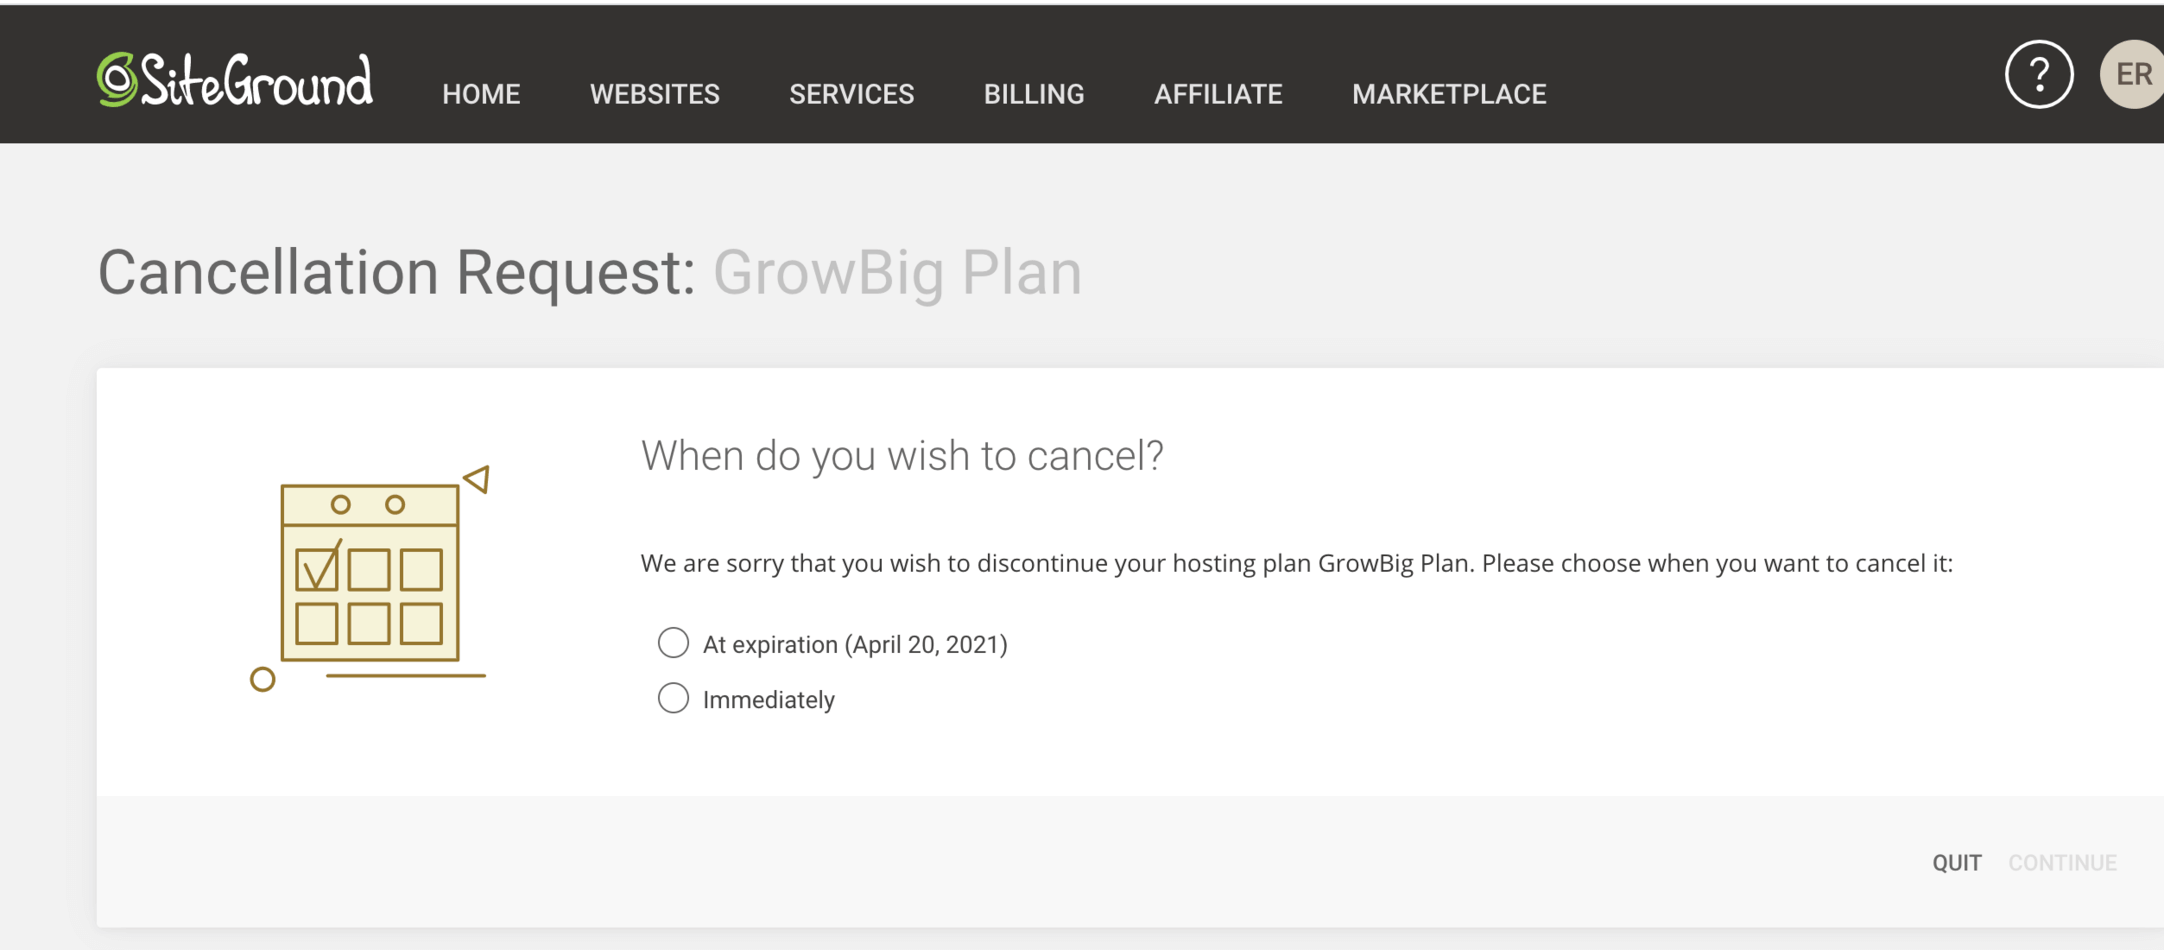 Screenshot on how to cancel SiteGround hosting - part 2.